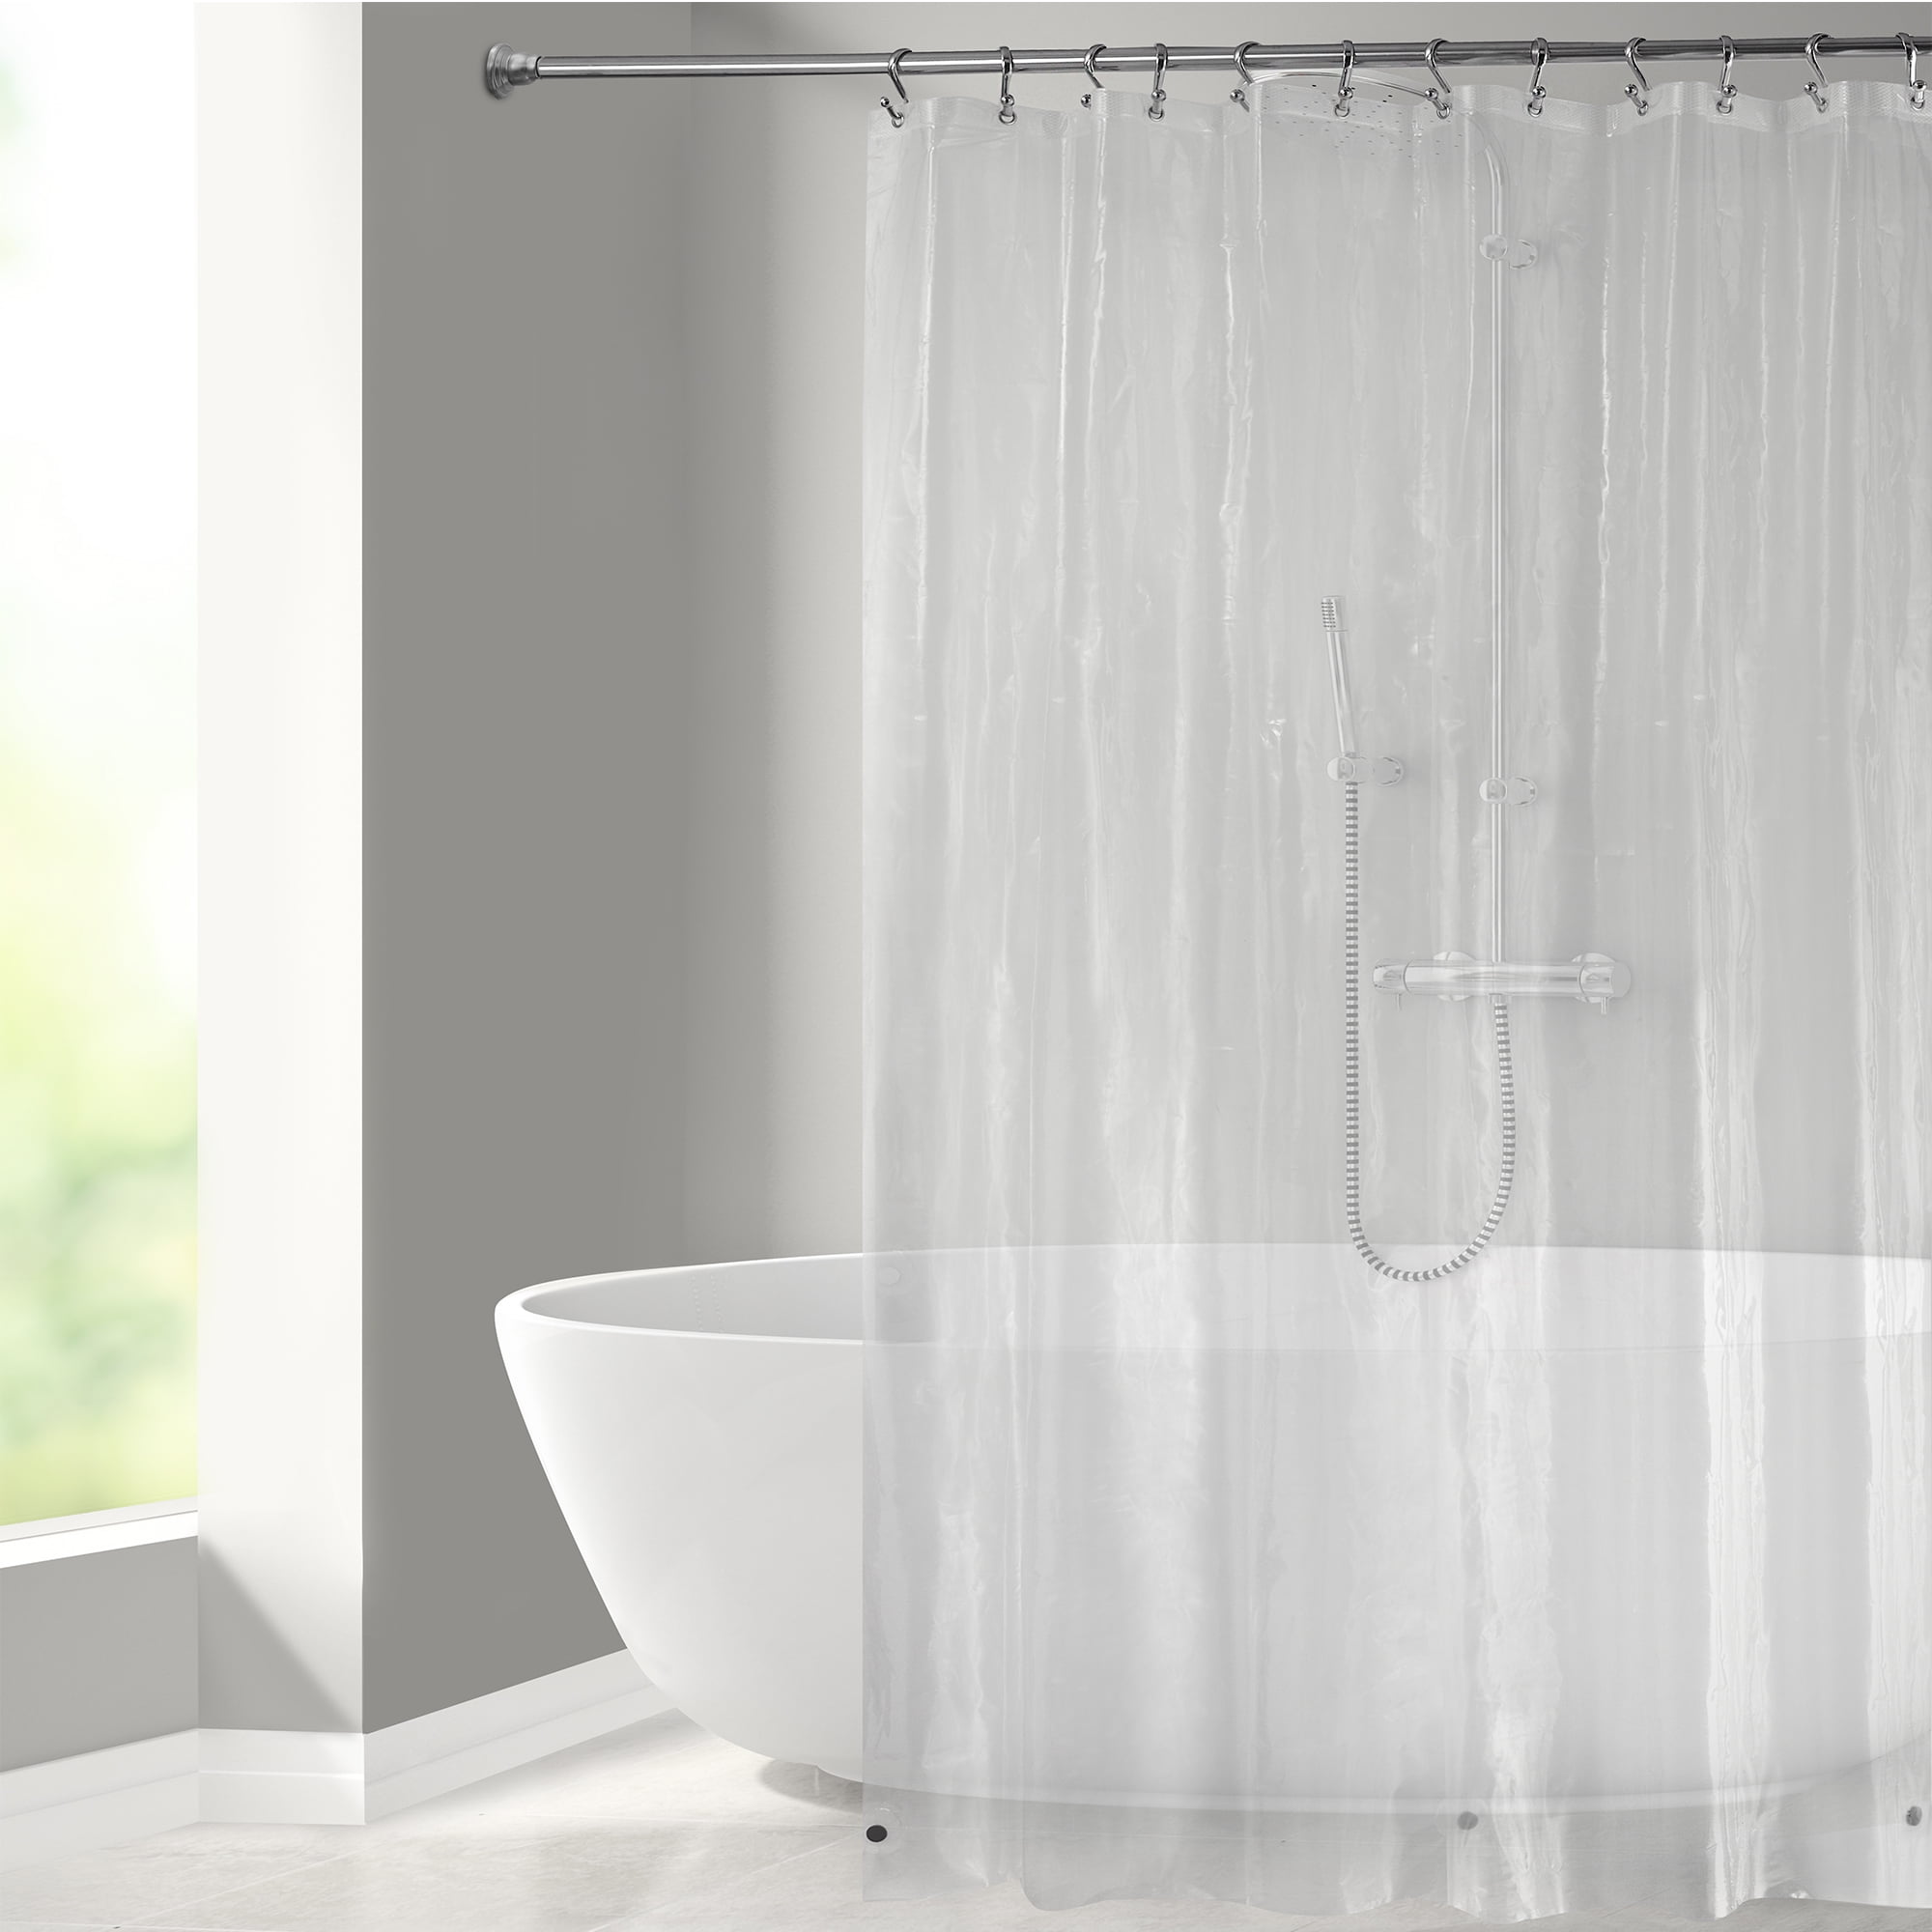 Better Homes And Gardens Shower Liner, Shower Curtain Liner With Suction Cups On Sides